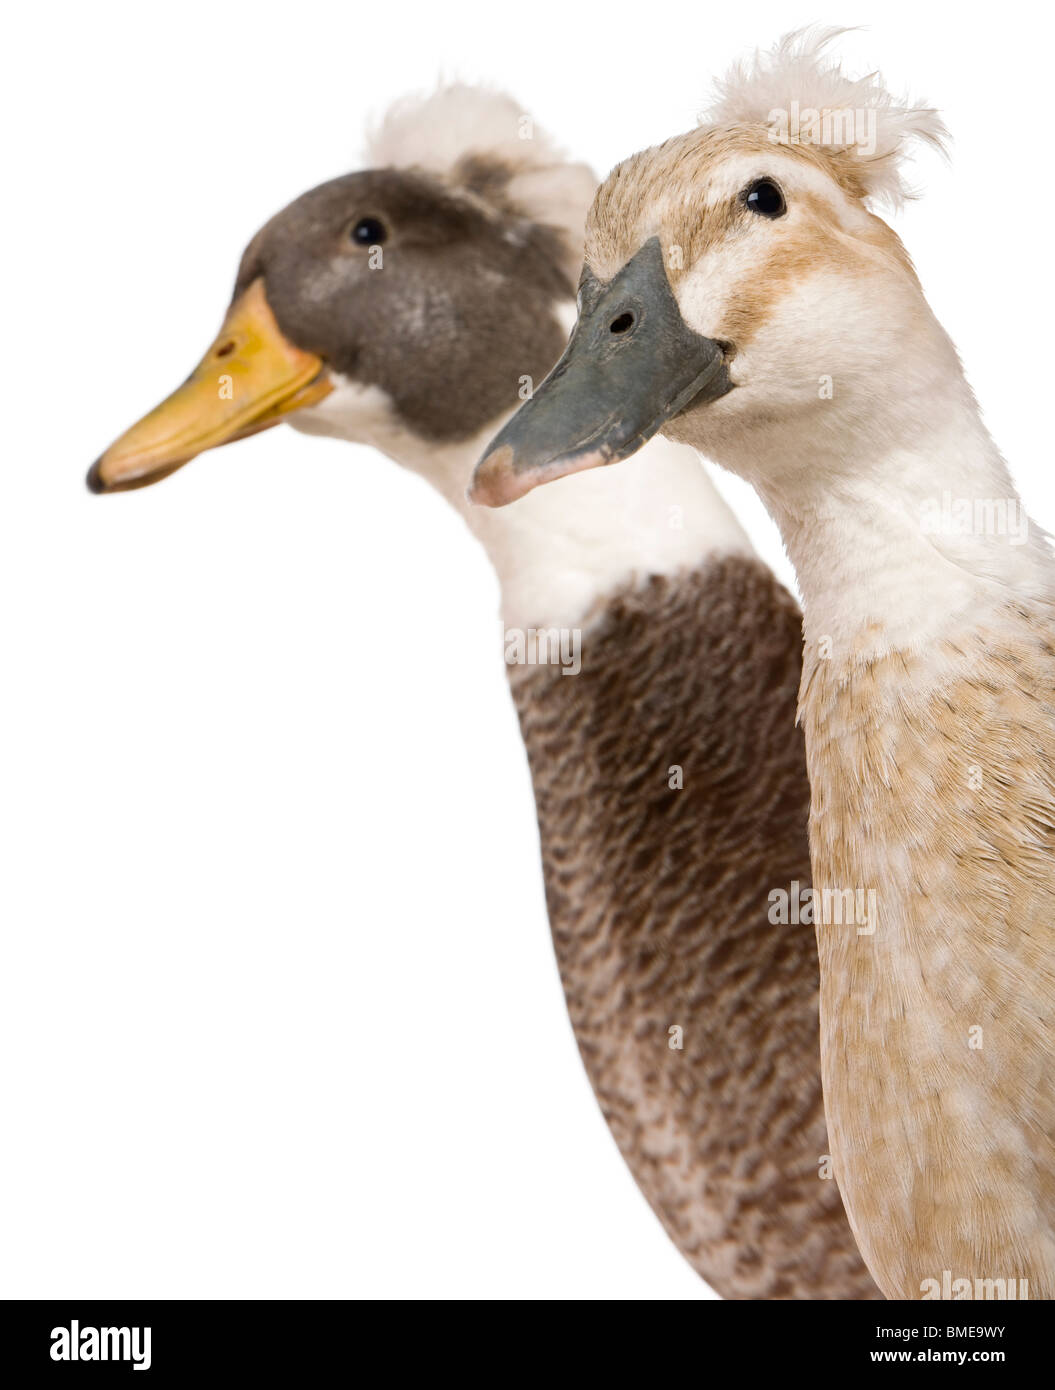 Close-up headshot of Male and Female Crested Ducks, 3 years old, standing in front of white background Stock Photo